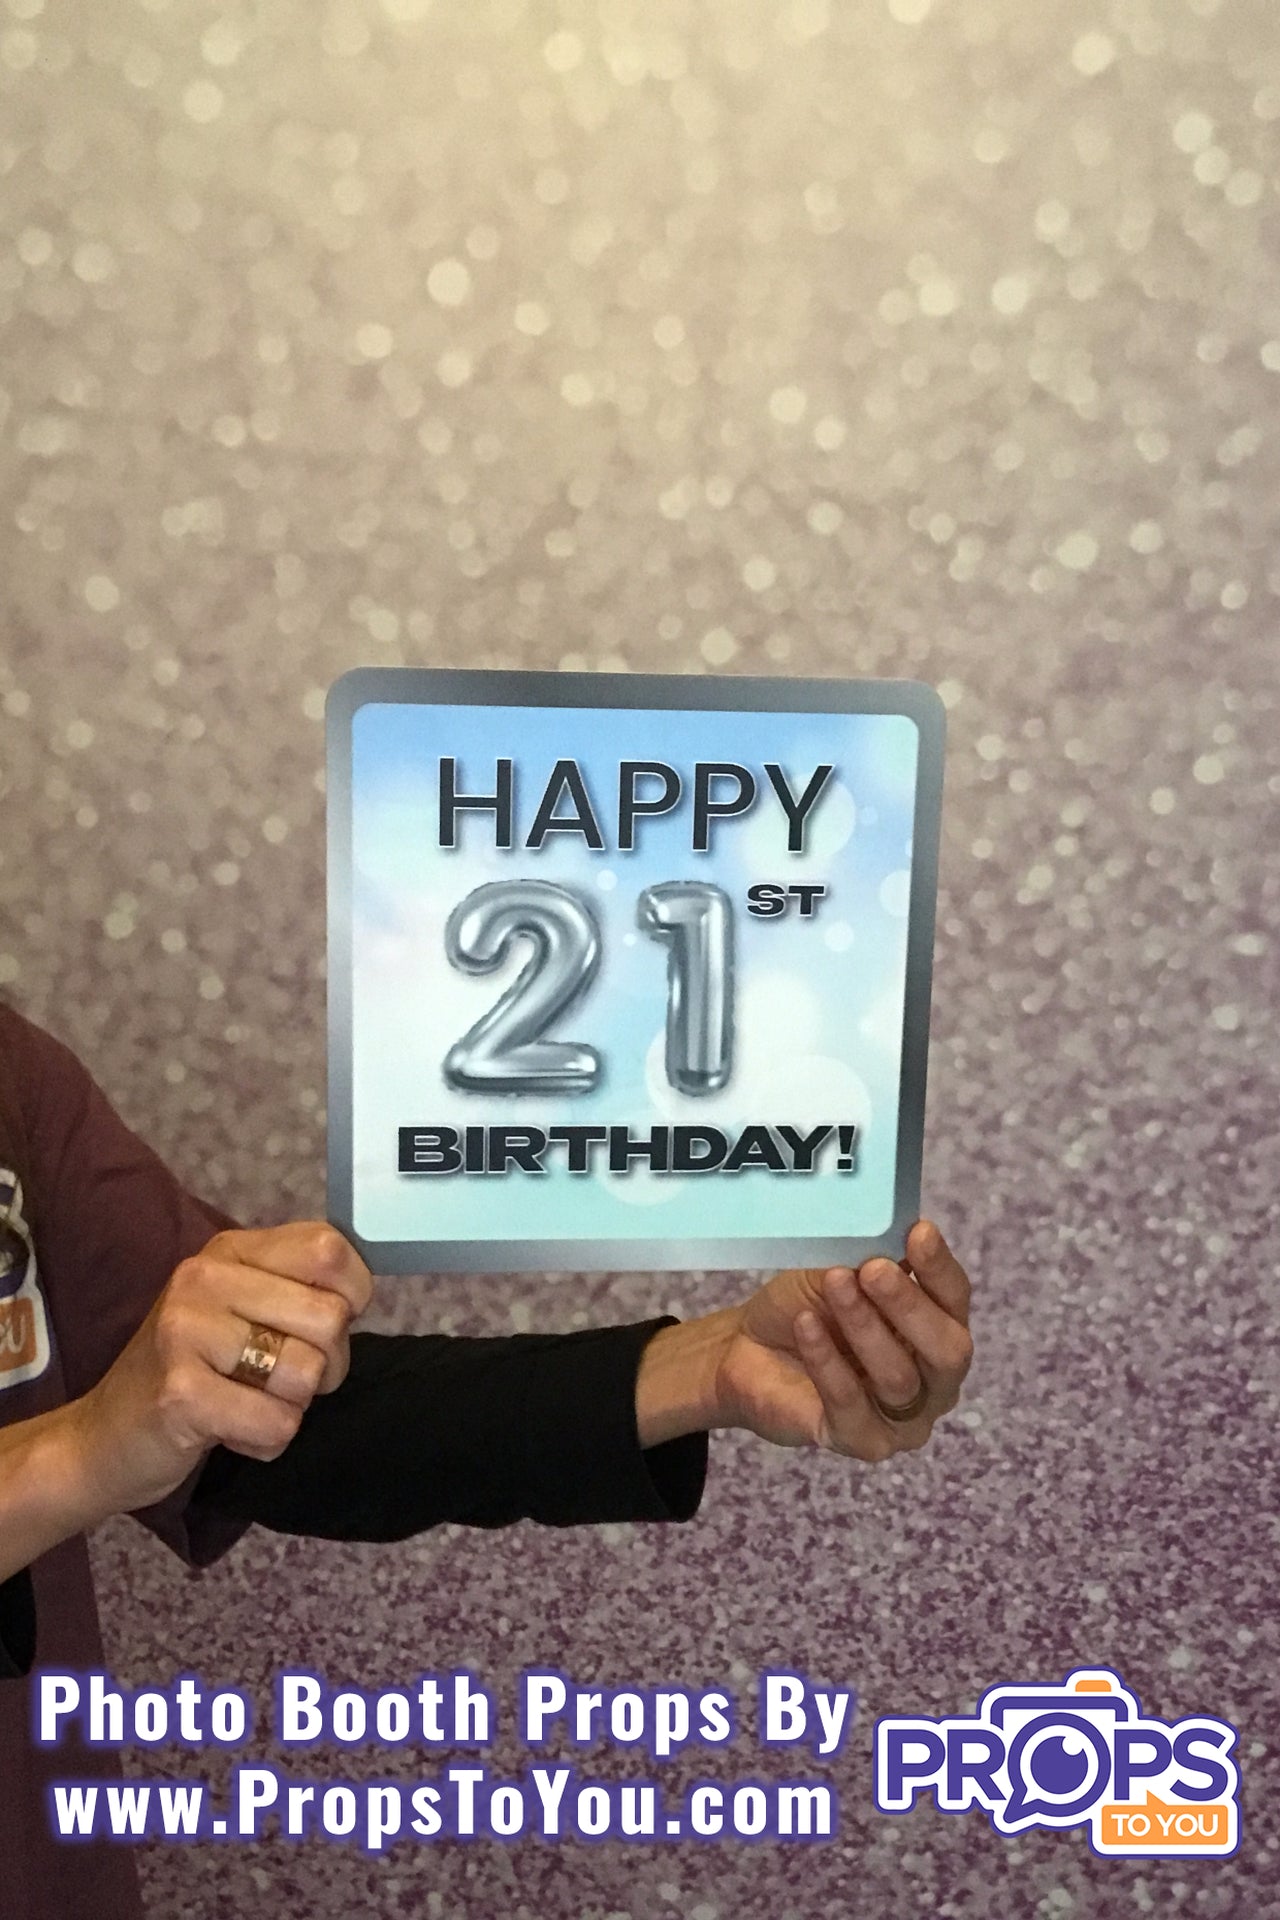 BUNDLE! 21st Birthday - 5 Double-Sided Photo Booth Props